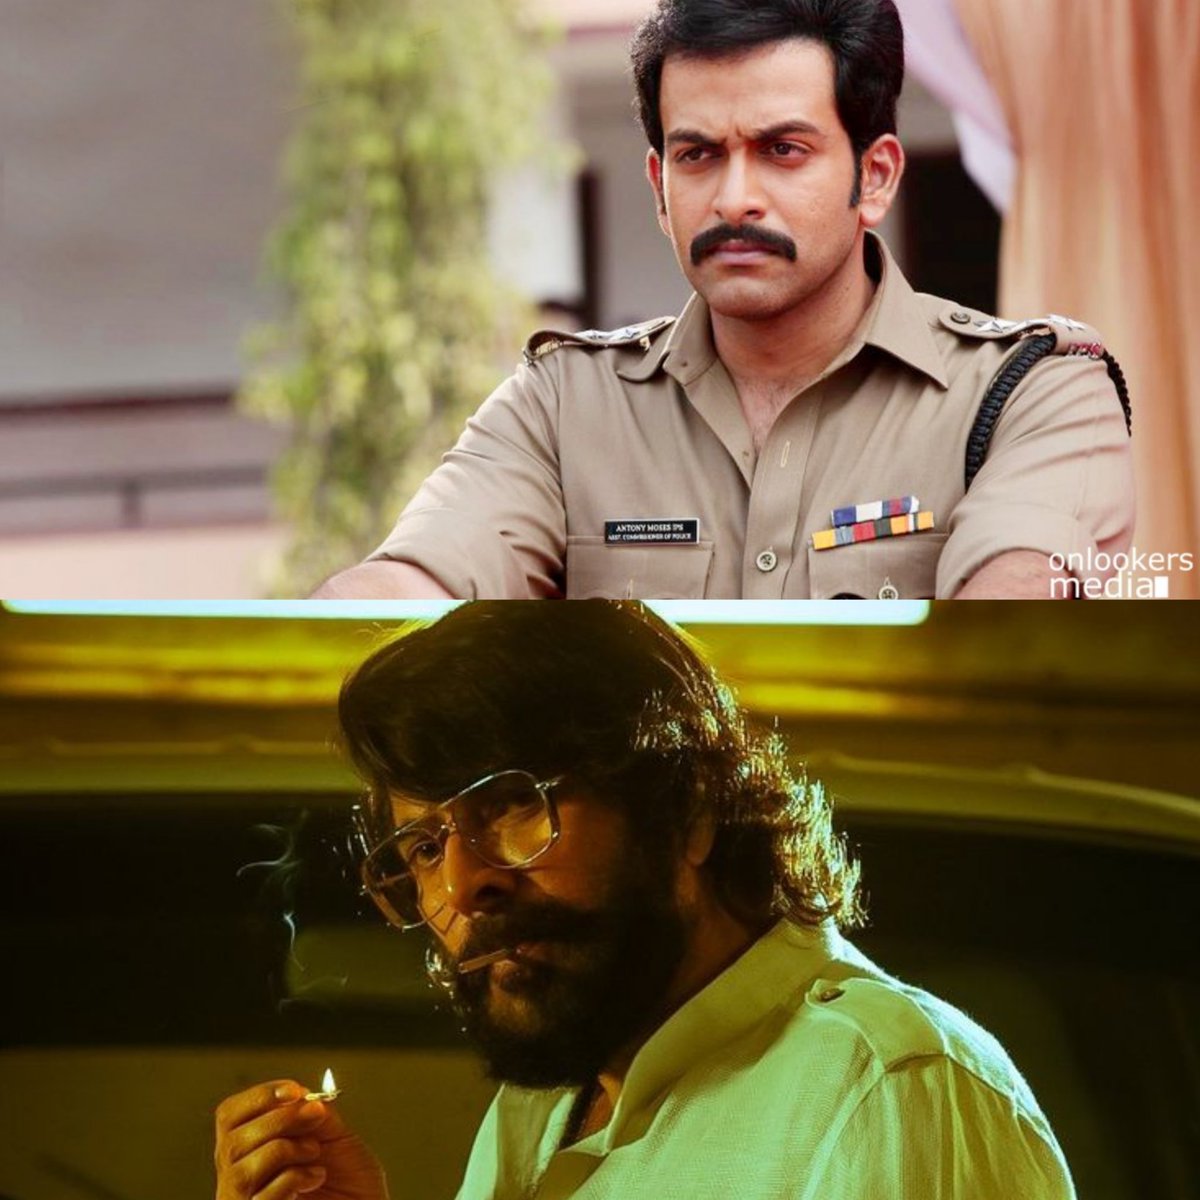 •Prithvi as Police
•Thriller subject
•Mammootty as Antagonist
•Not directed by Parvathy
•Anto Joseph Production 
•Debut Director.

#Prithvirajsukumaran - #Mammootty

SOON!!